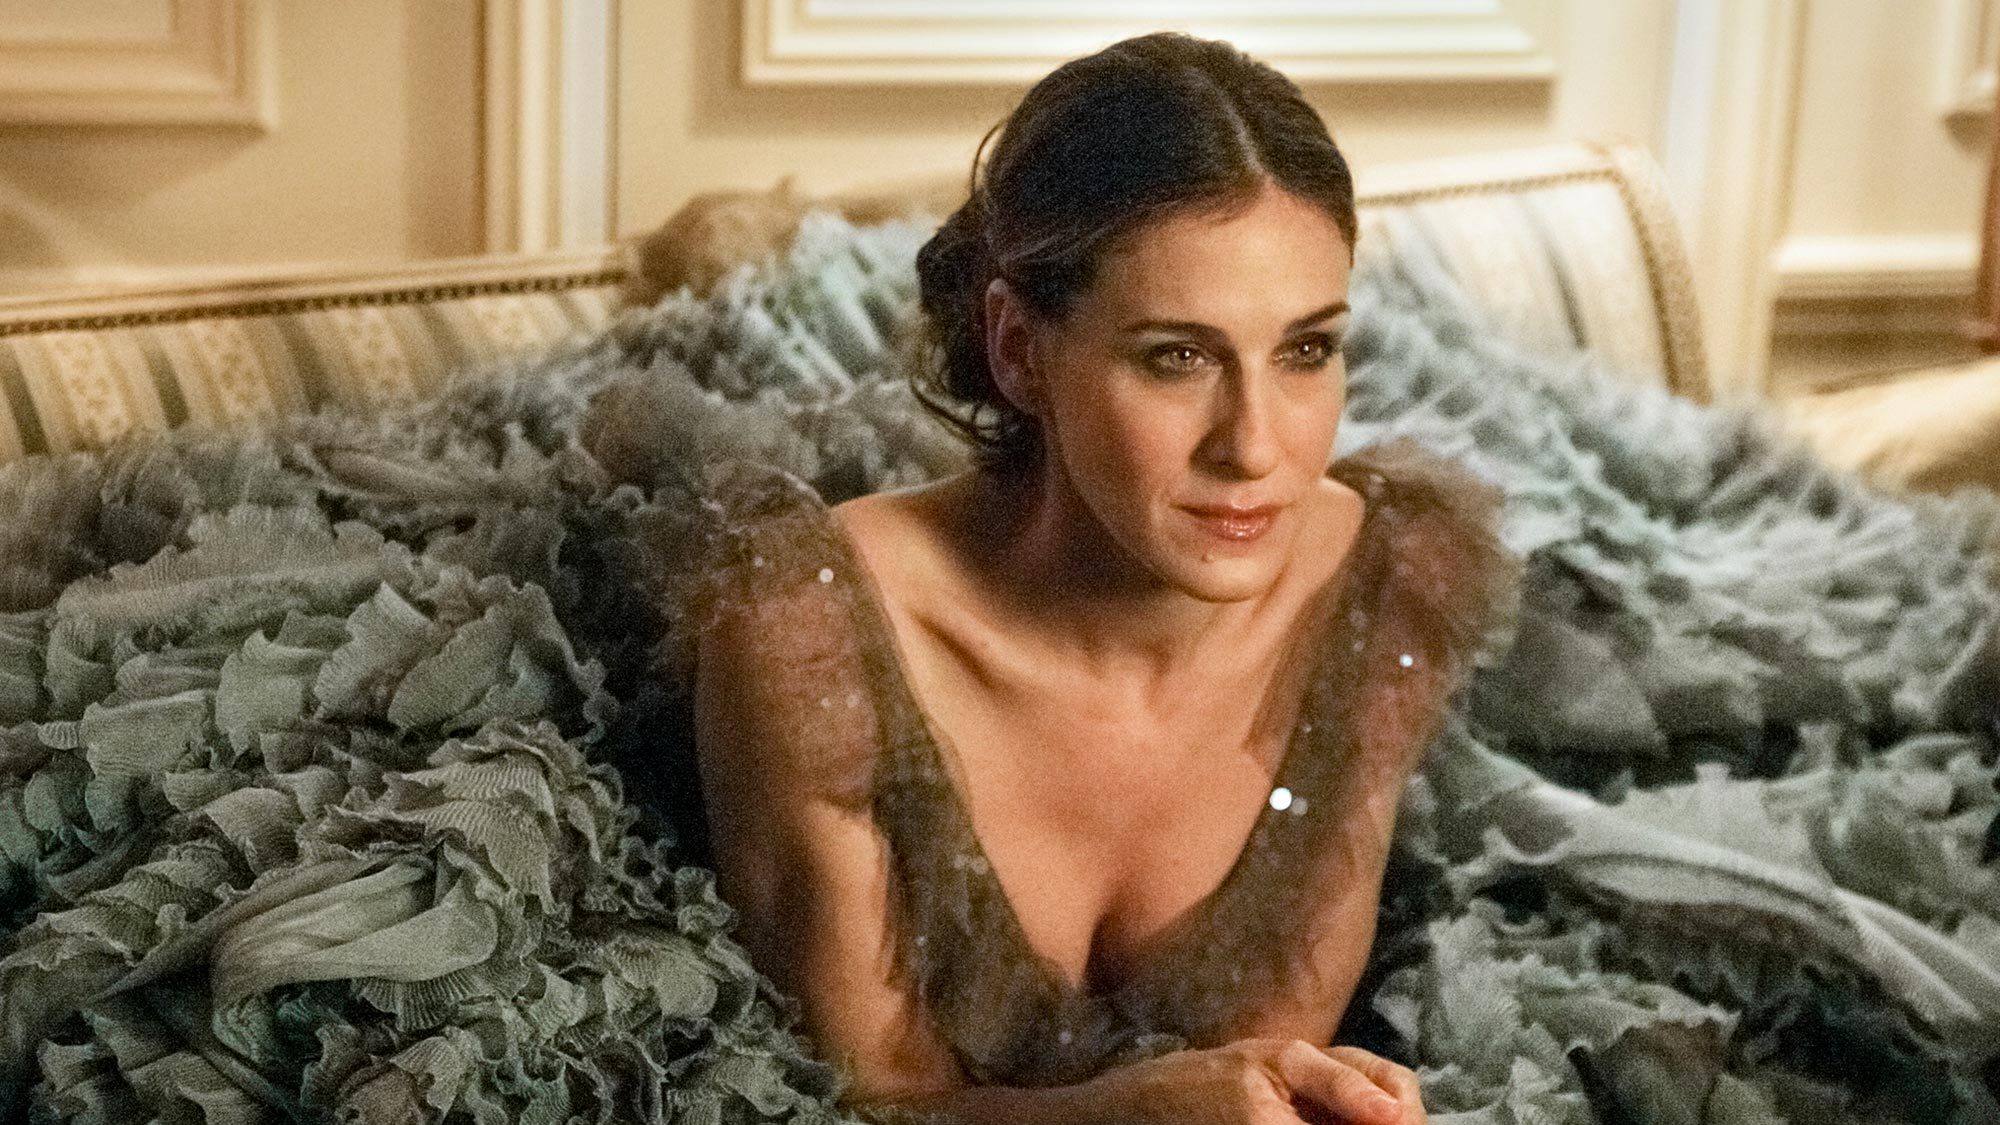 Sarah Jessica Parker as Carrie Bradshaw in <i>Sex and the City</i>